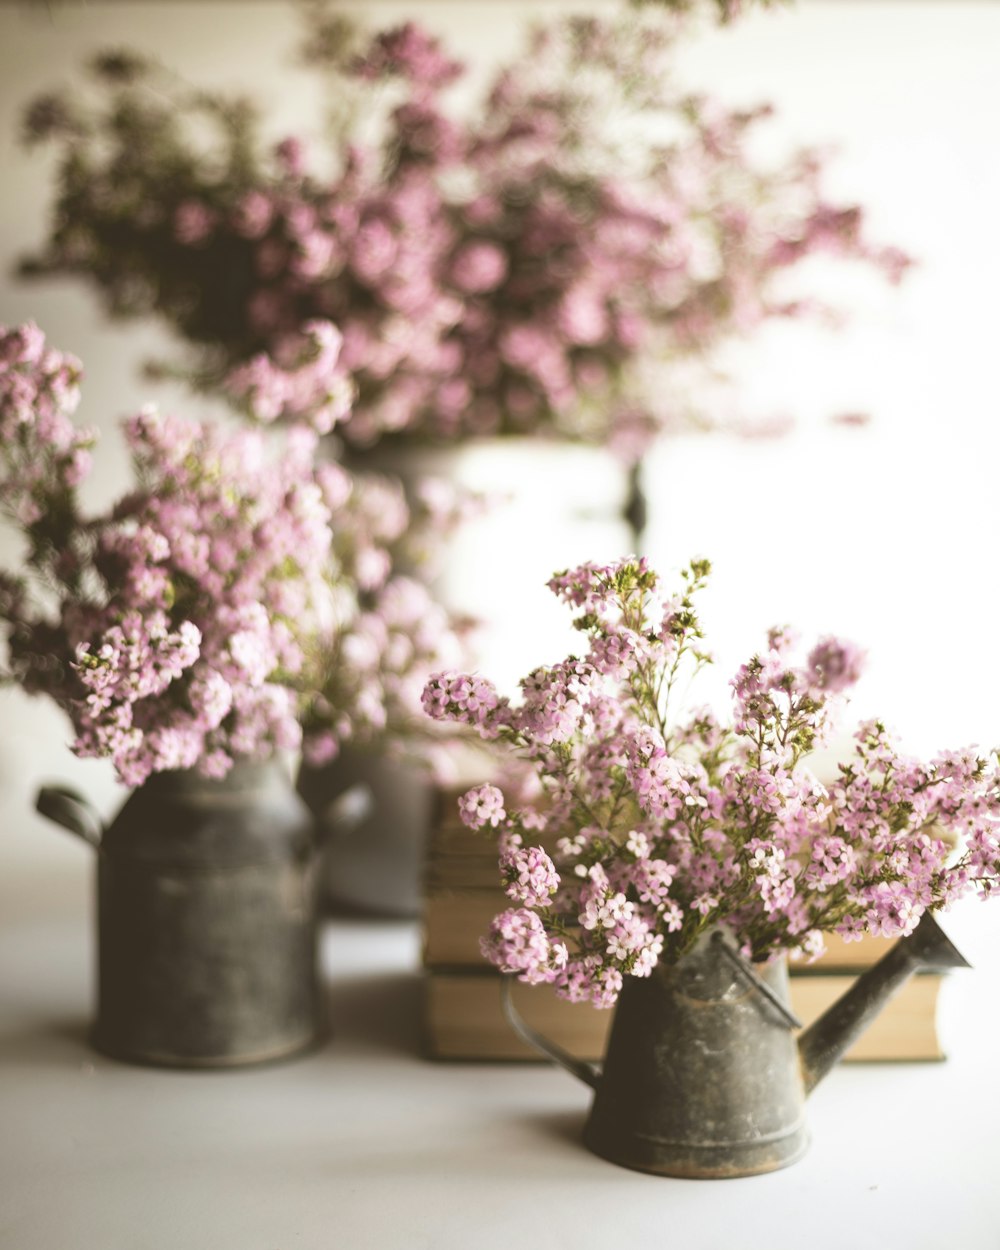 pink and white flowers in gray ceramic vase